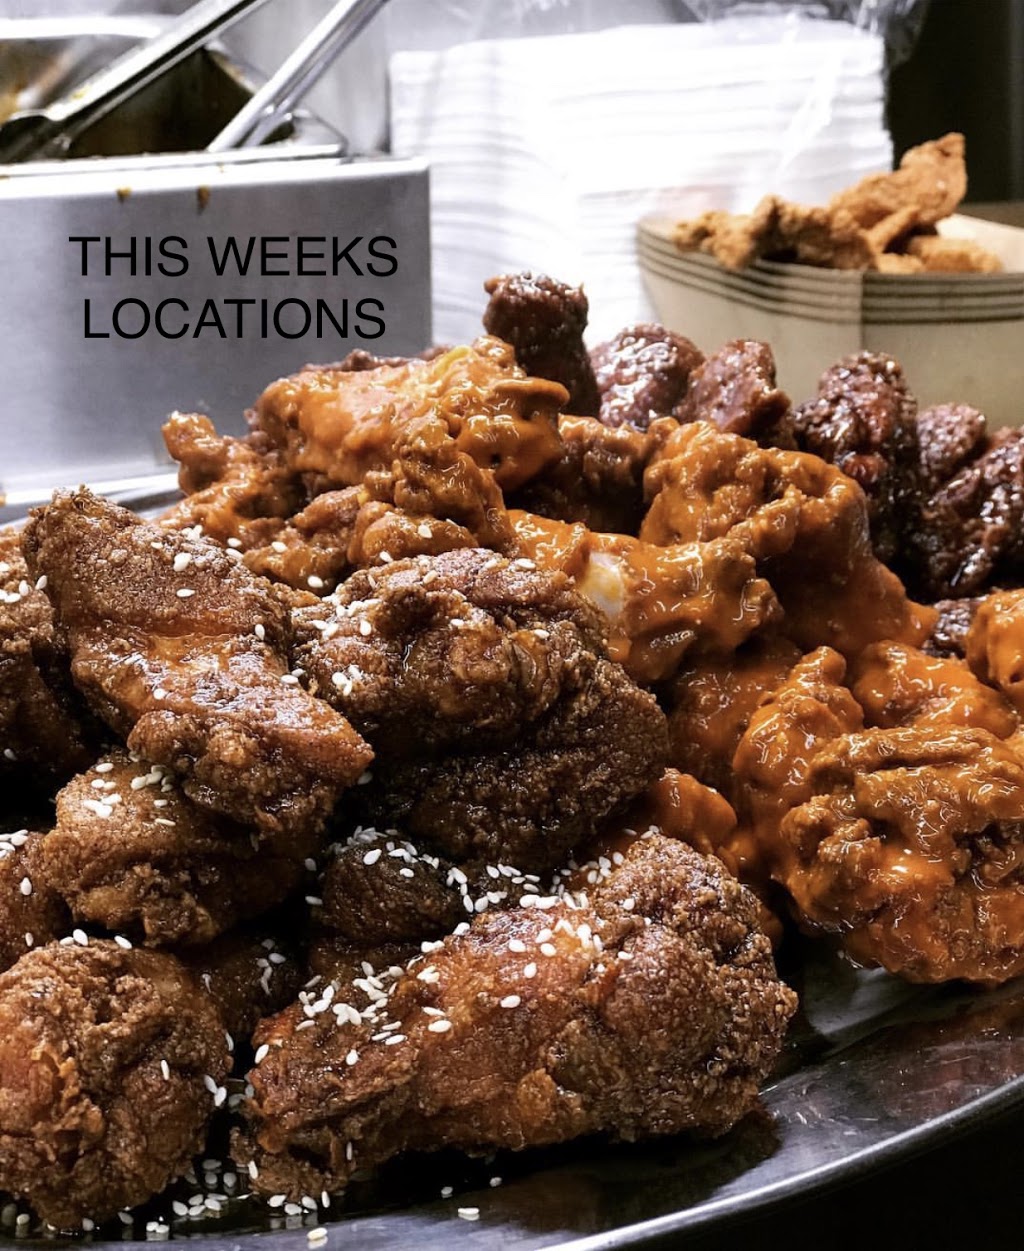 King Of The Wings | restaurant | 378-380 Deception Bay Rd, Deception Bay QLD 4508, Australia | 0433177478 OR +61 433 177 478